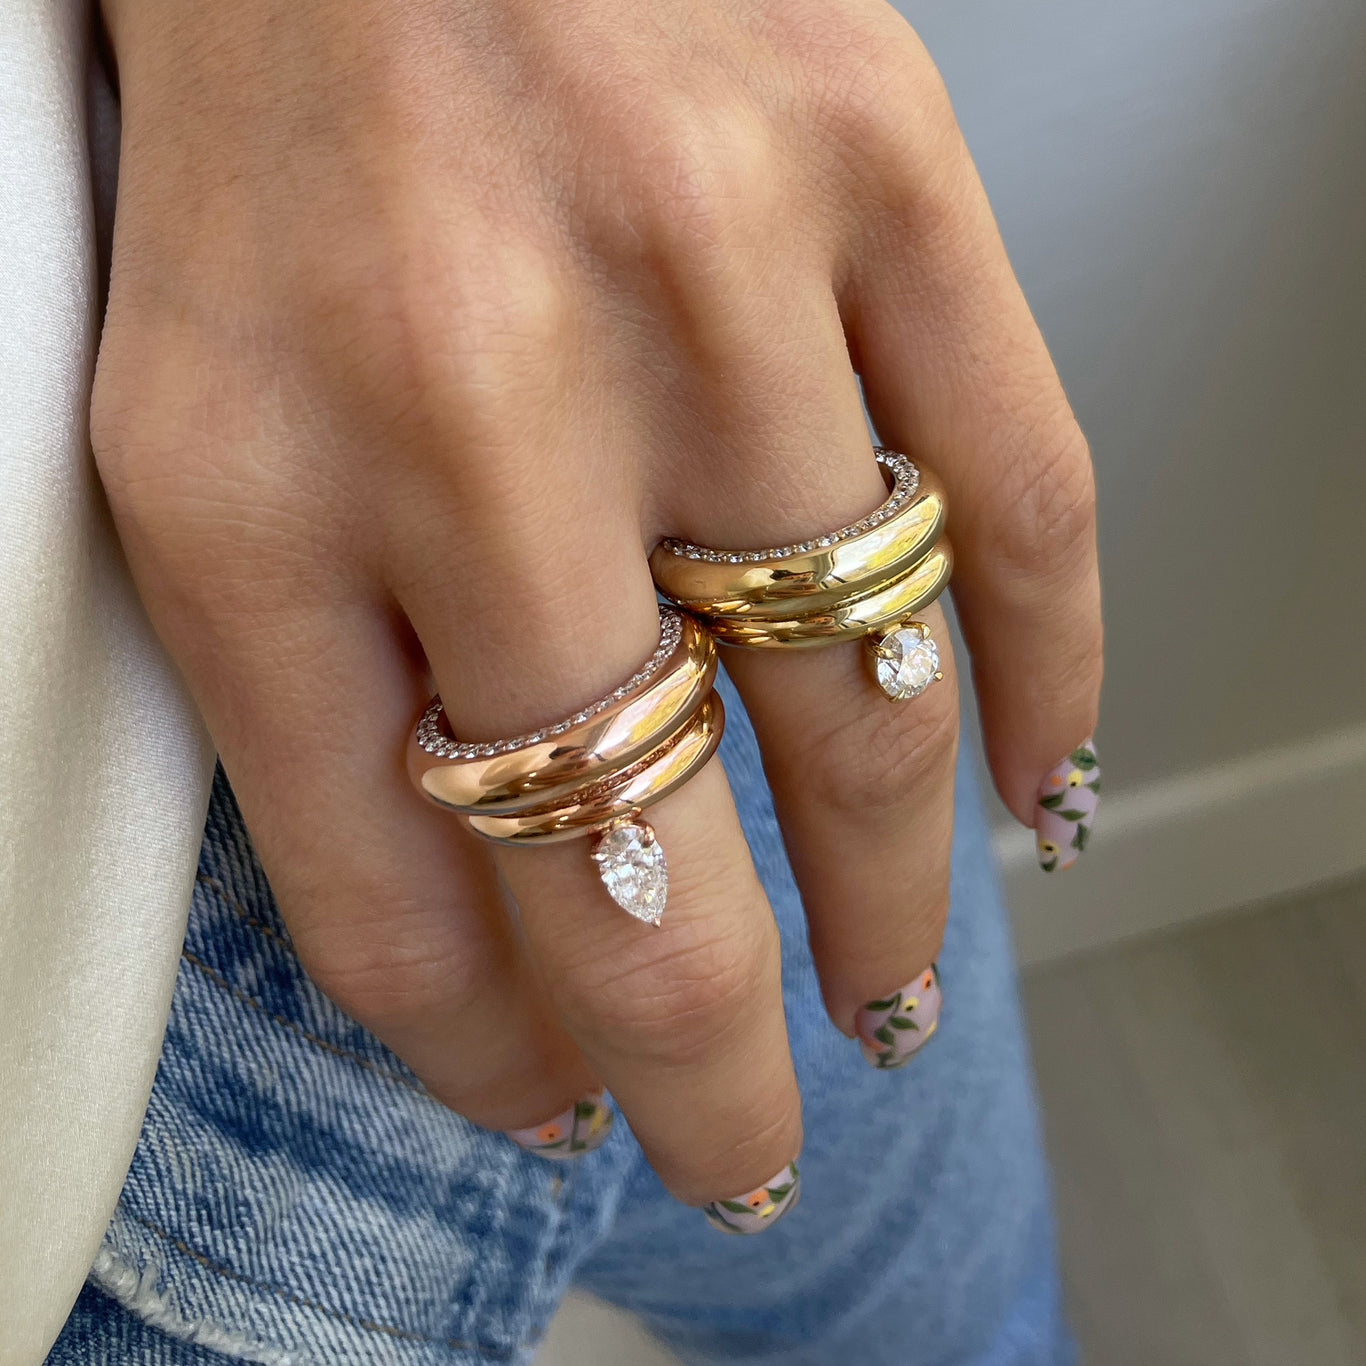 Floating Pear Ring shown layered with the Bombe Ring